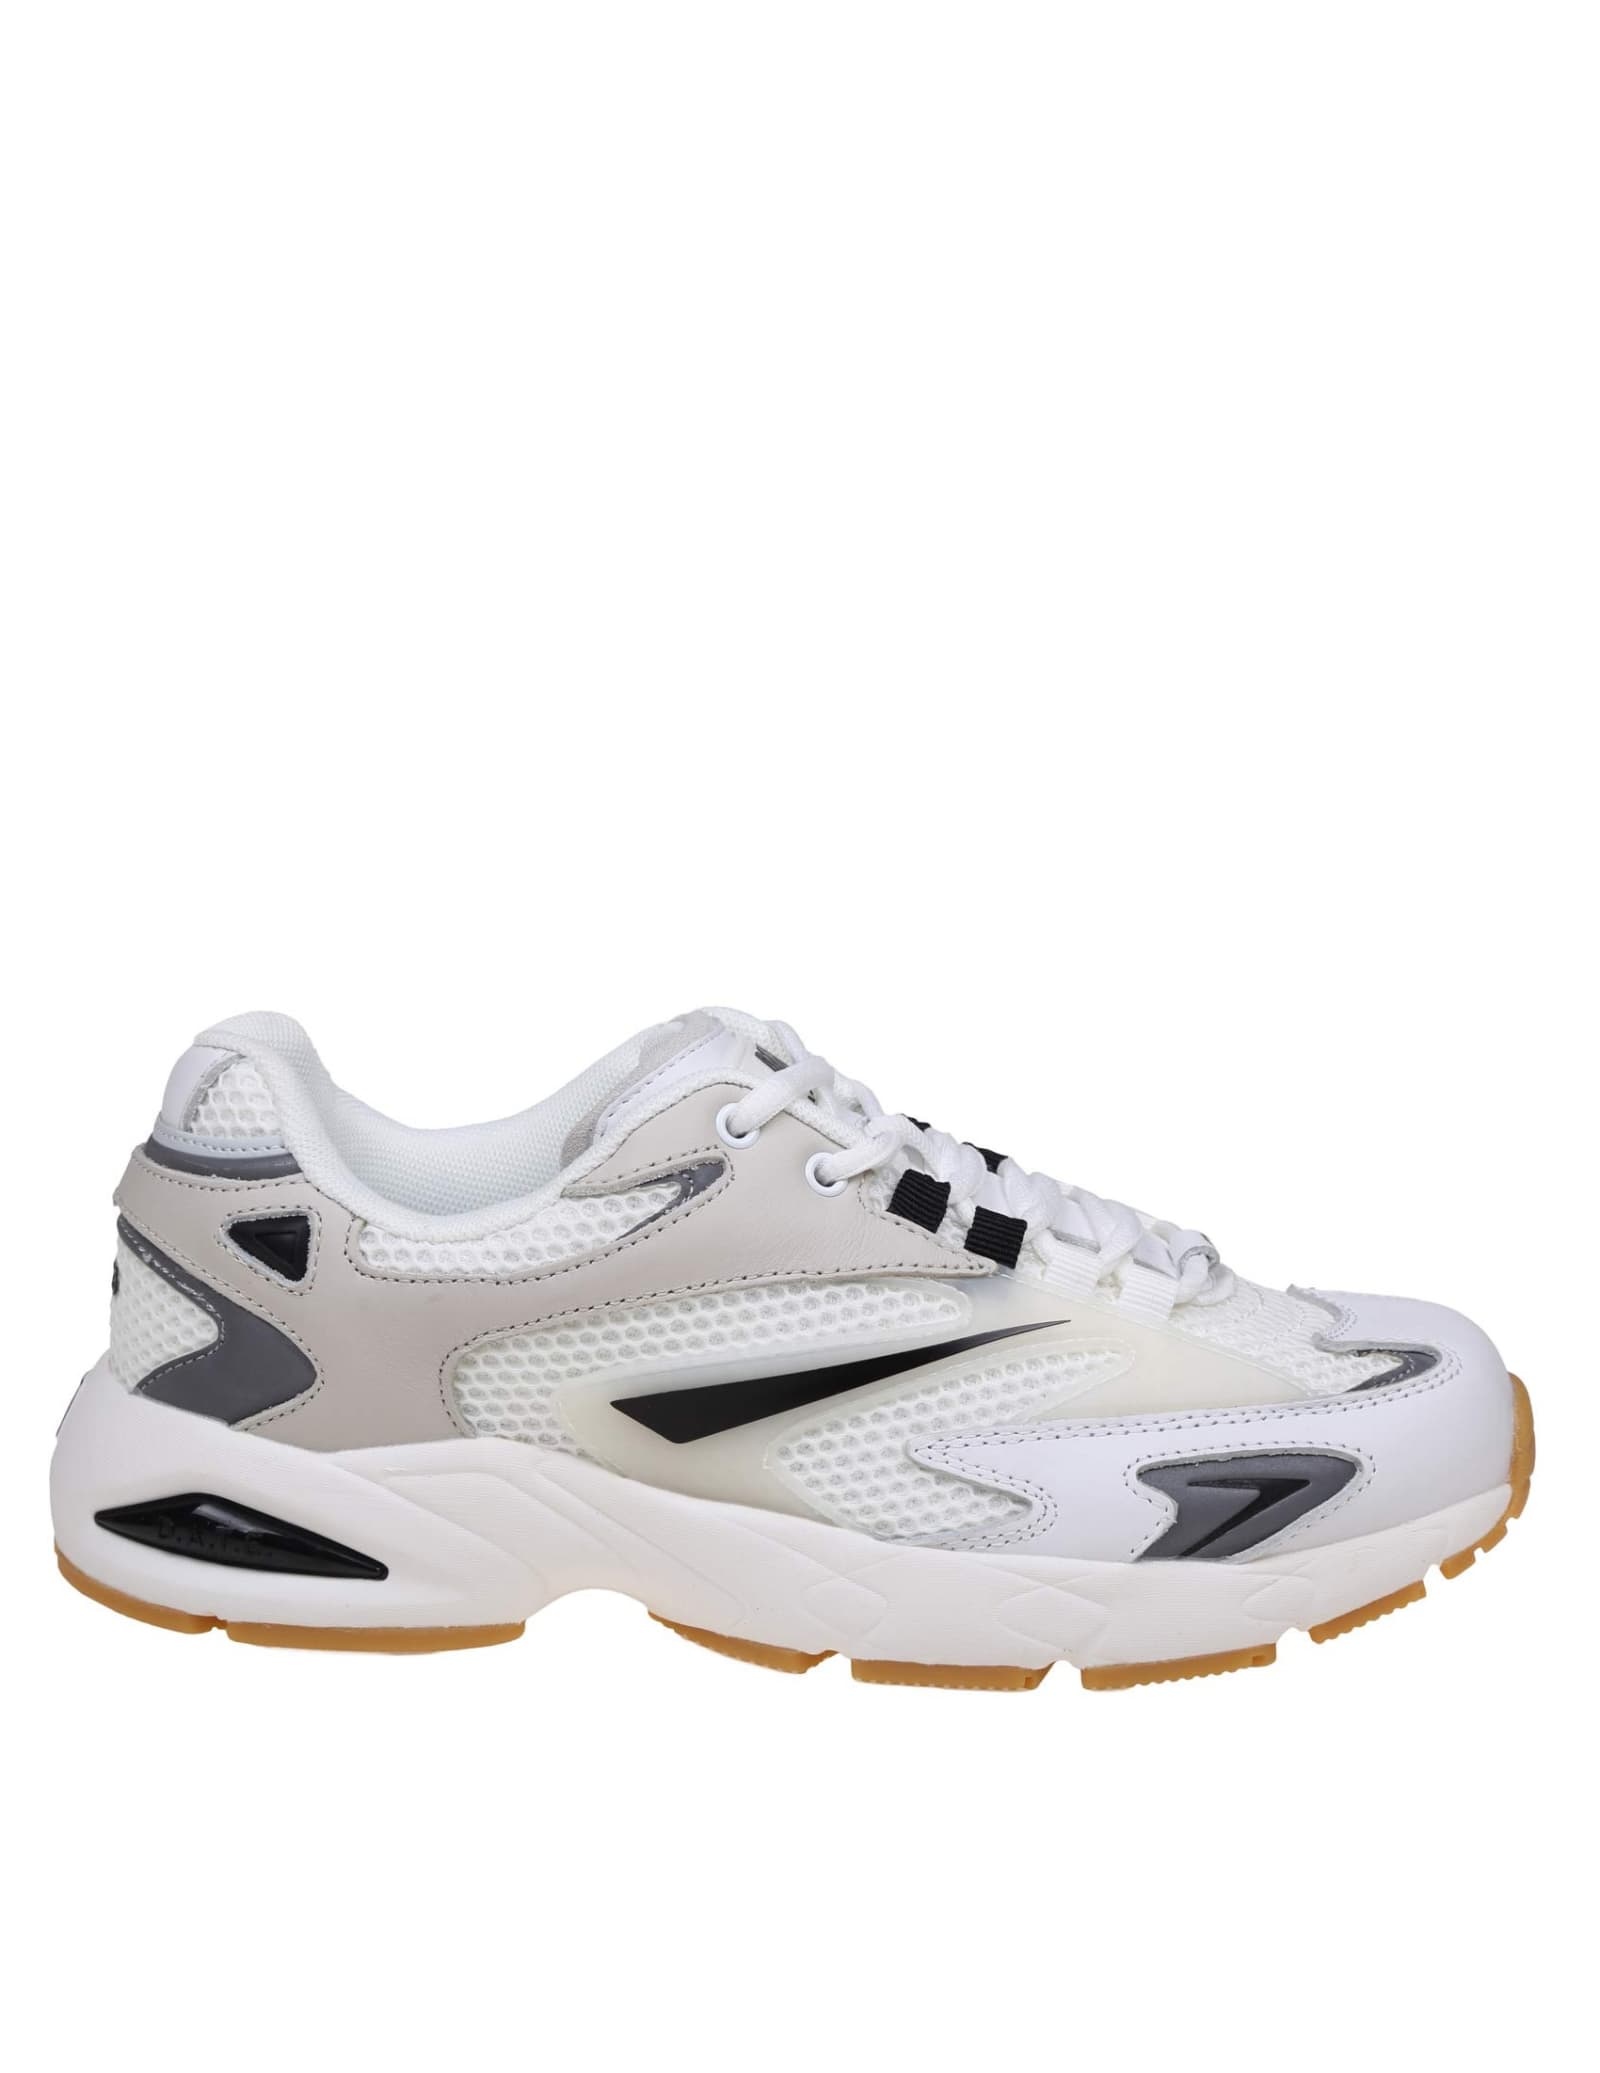 Sn23 Sneakers In White/grey Mesh And Leather